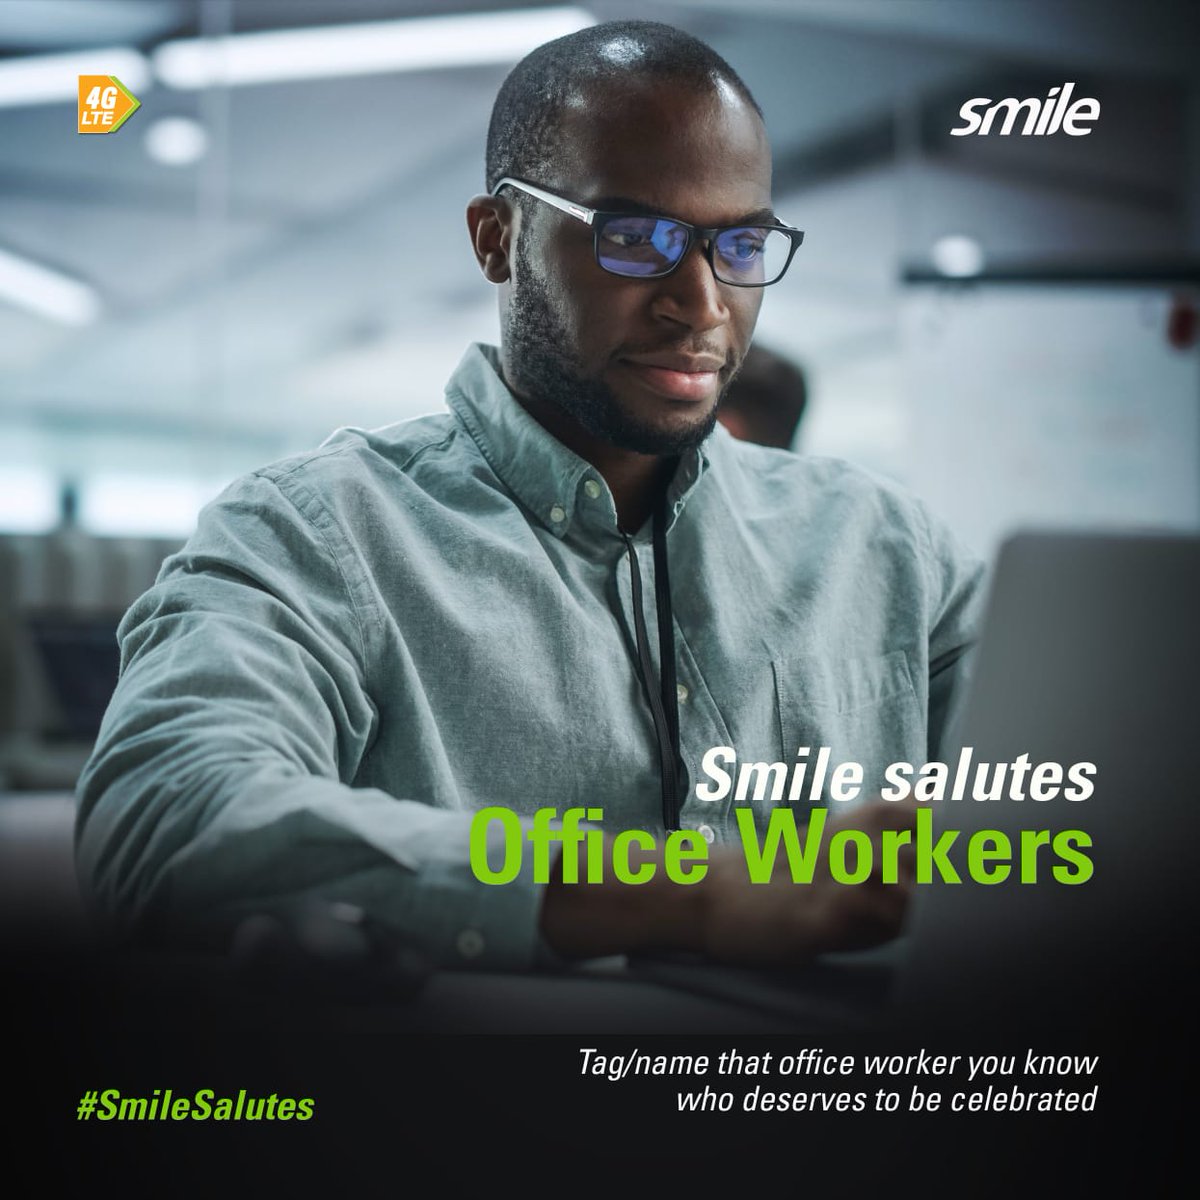 Smile Salutes the White Collar/Corporate Workers today

Tag any White Collar/Corporate Worker that you know who deserves to be celebrated. 

Highest nominations by reactions wins a special gift. Smile

#Smile #SmileSalutes #workersday #celebrate